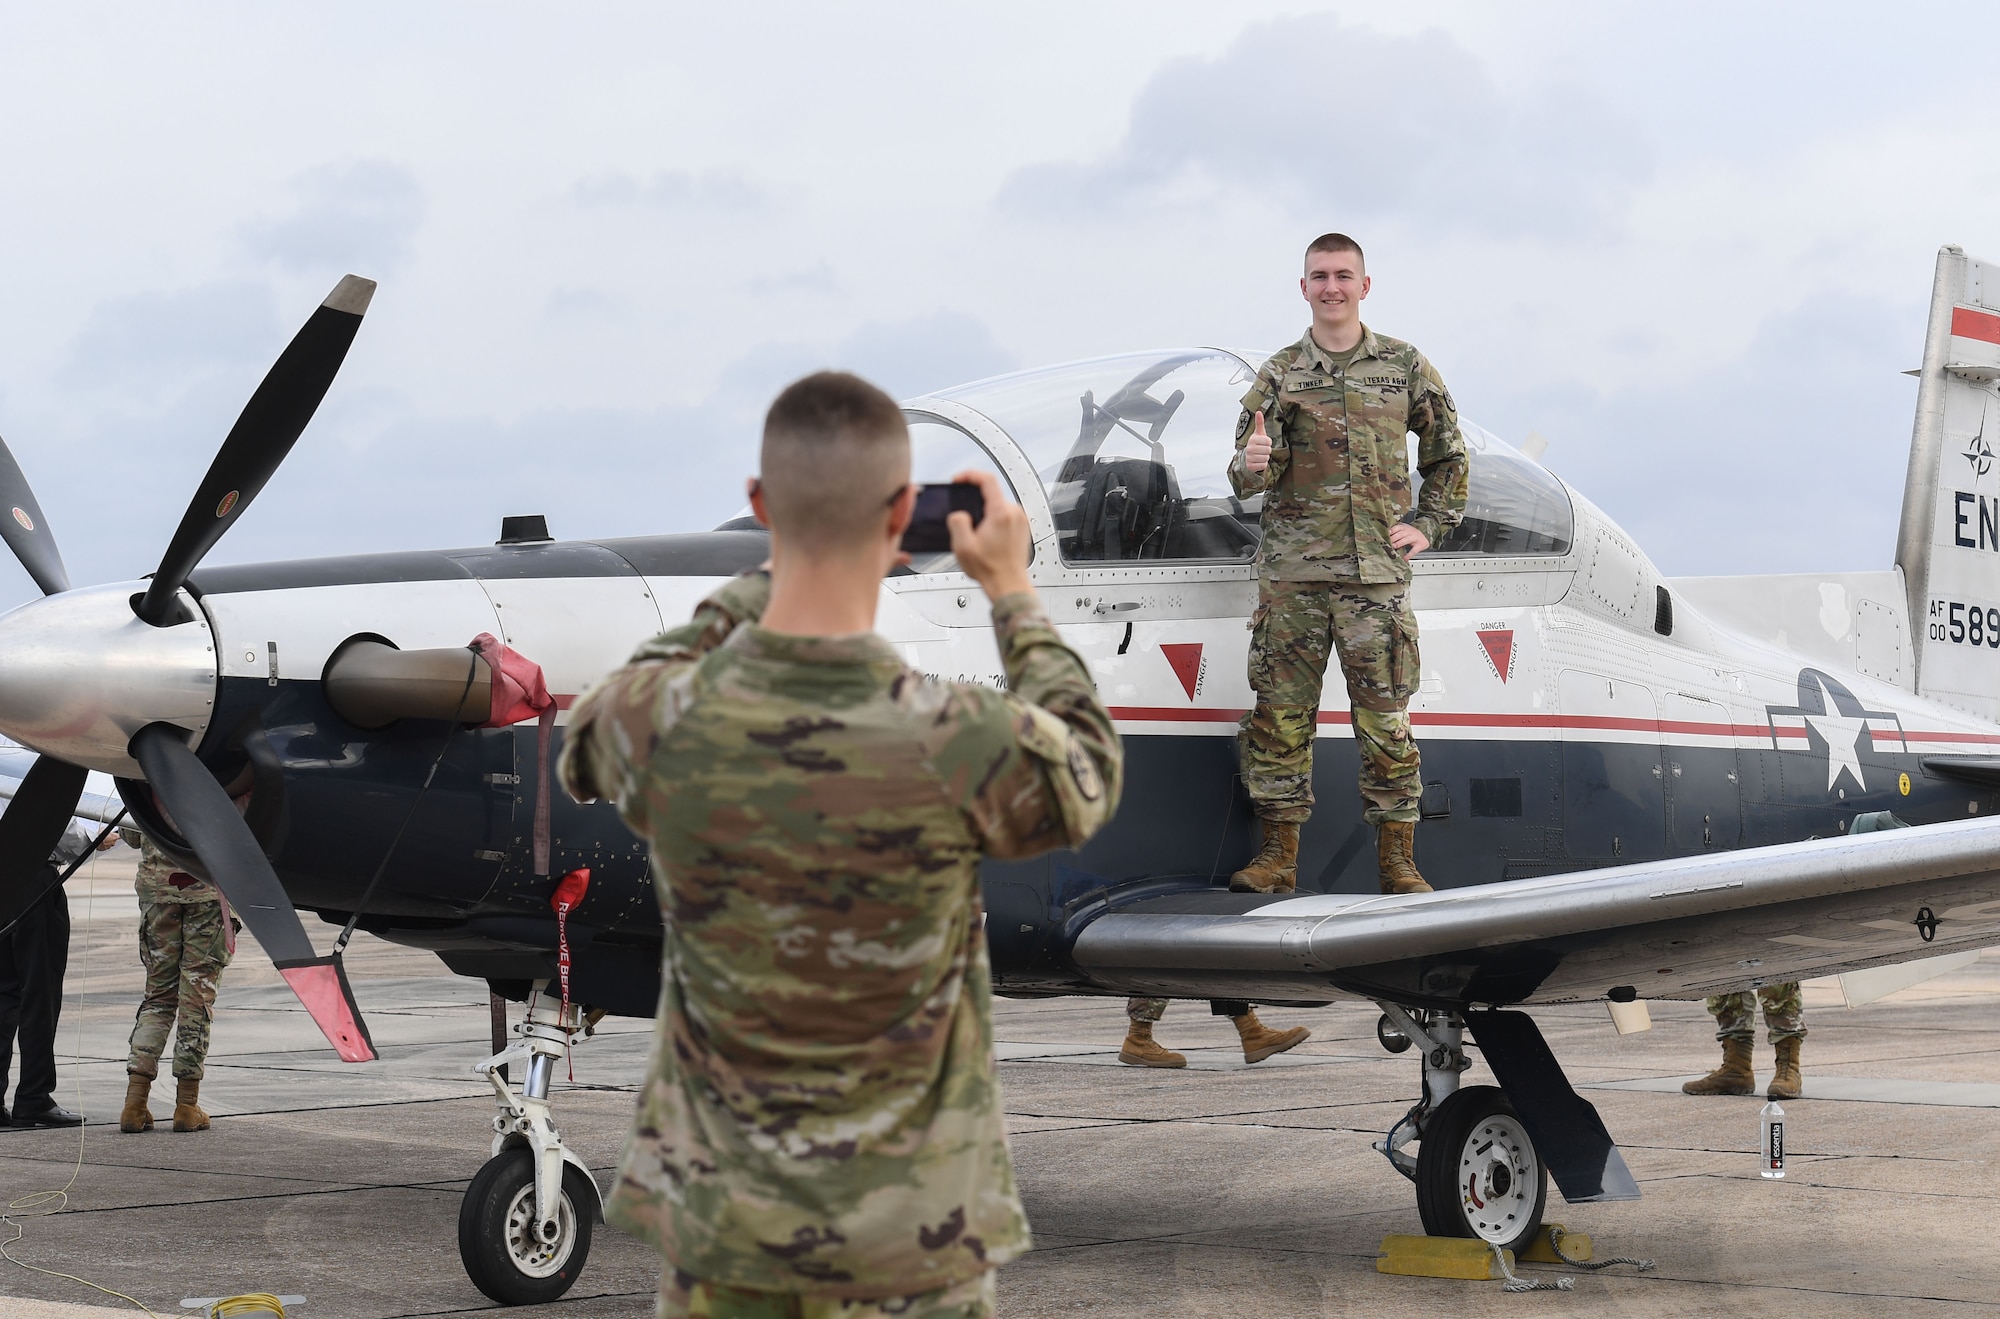 Andrew Tinker, Texas A&M University Air Force ROTC cadet, takes a photo of Kade Lieder, Texas A&M University Air Force ROTC cadet, while standing on the wing of a T-6 Texan during Pathways to Blue at Keesler Air Force Base, Mississippi, March 31, 2023.